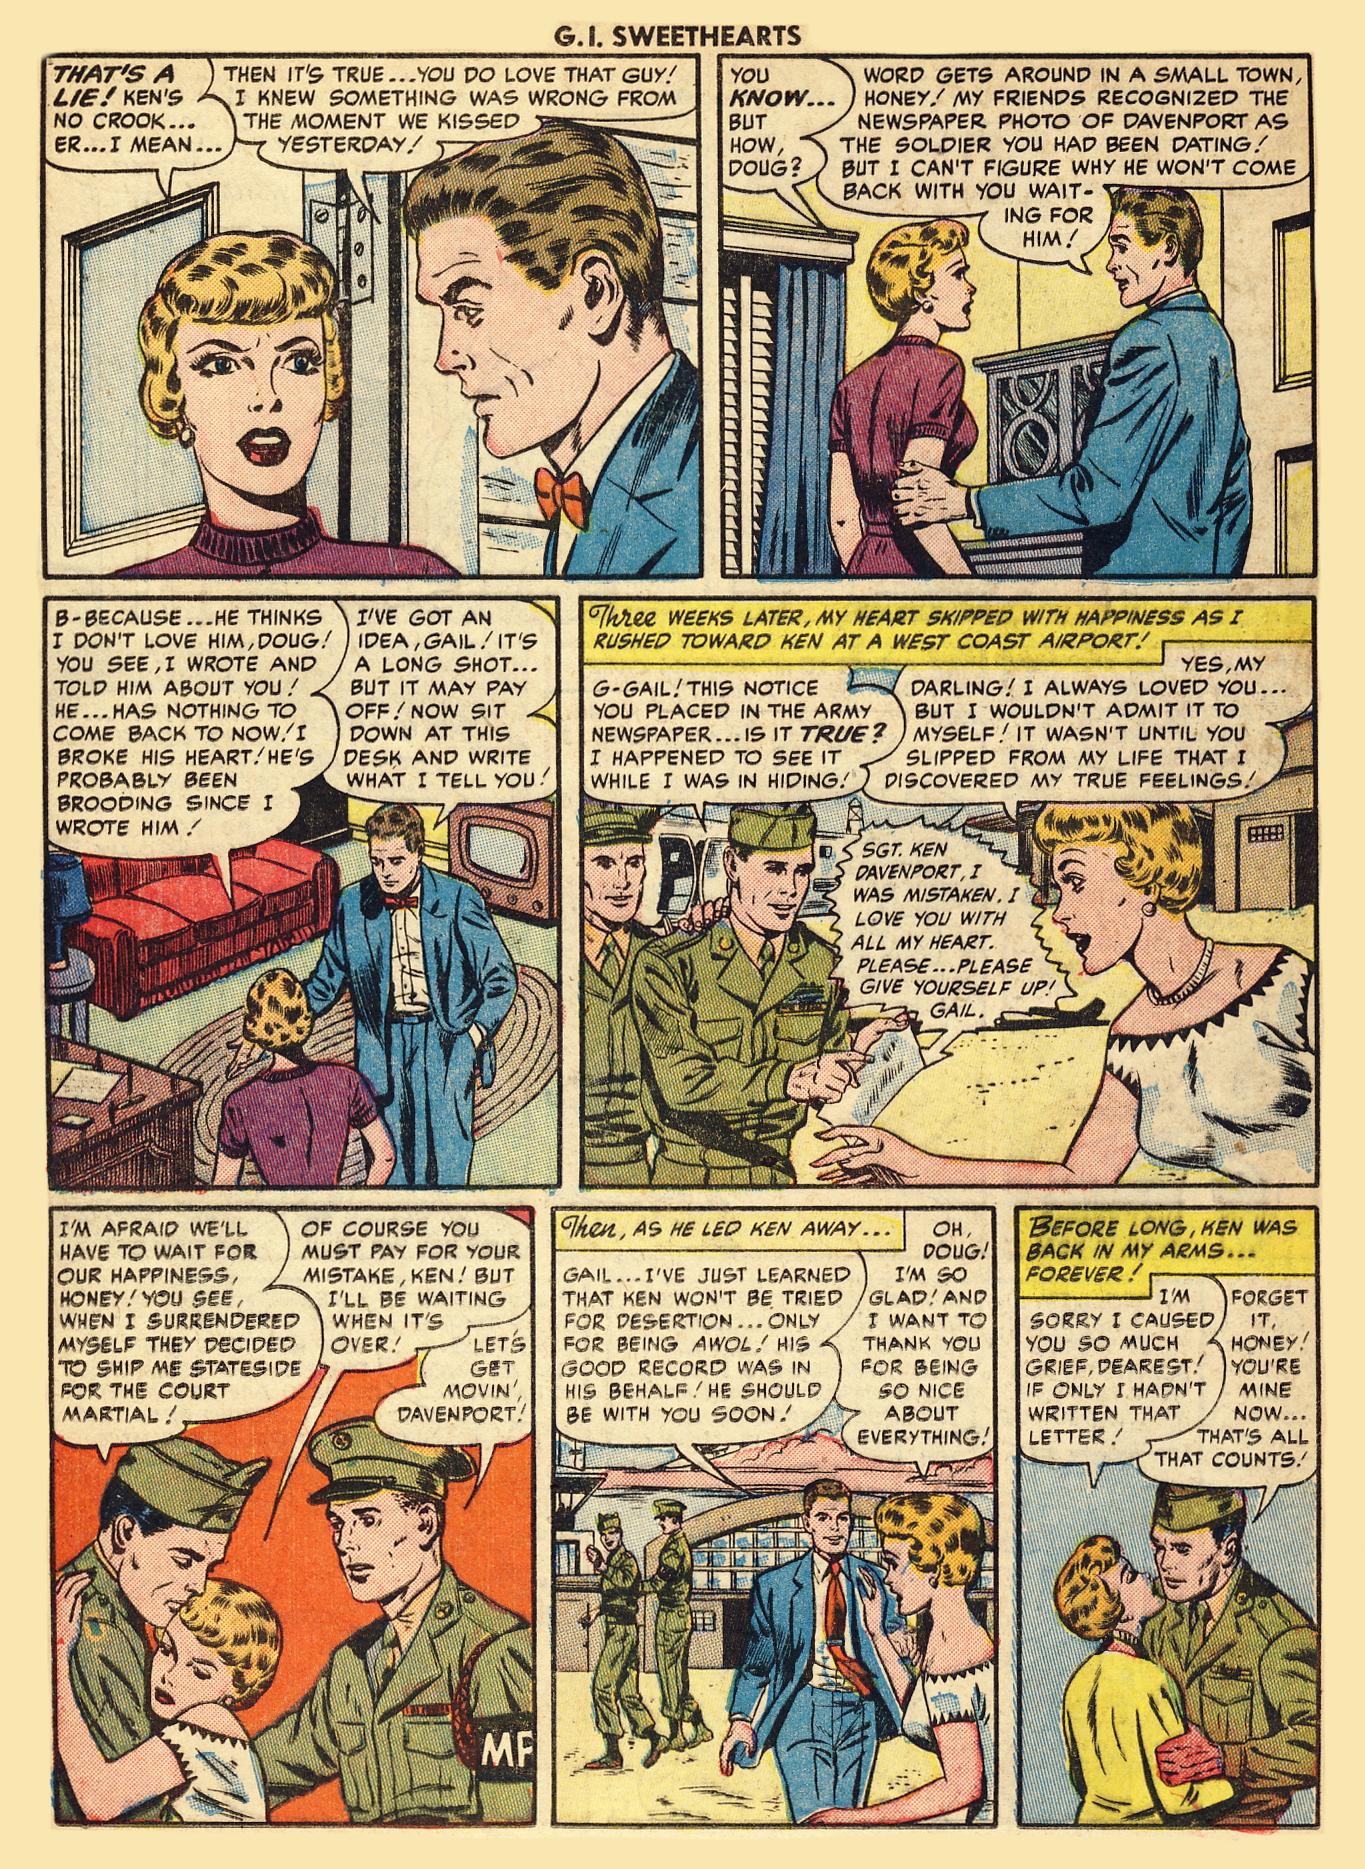 Read online G.I. Sweethearts comic -  Issue #41 - 24